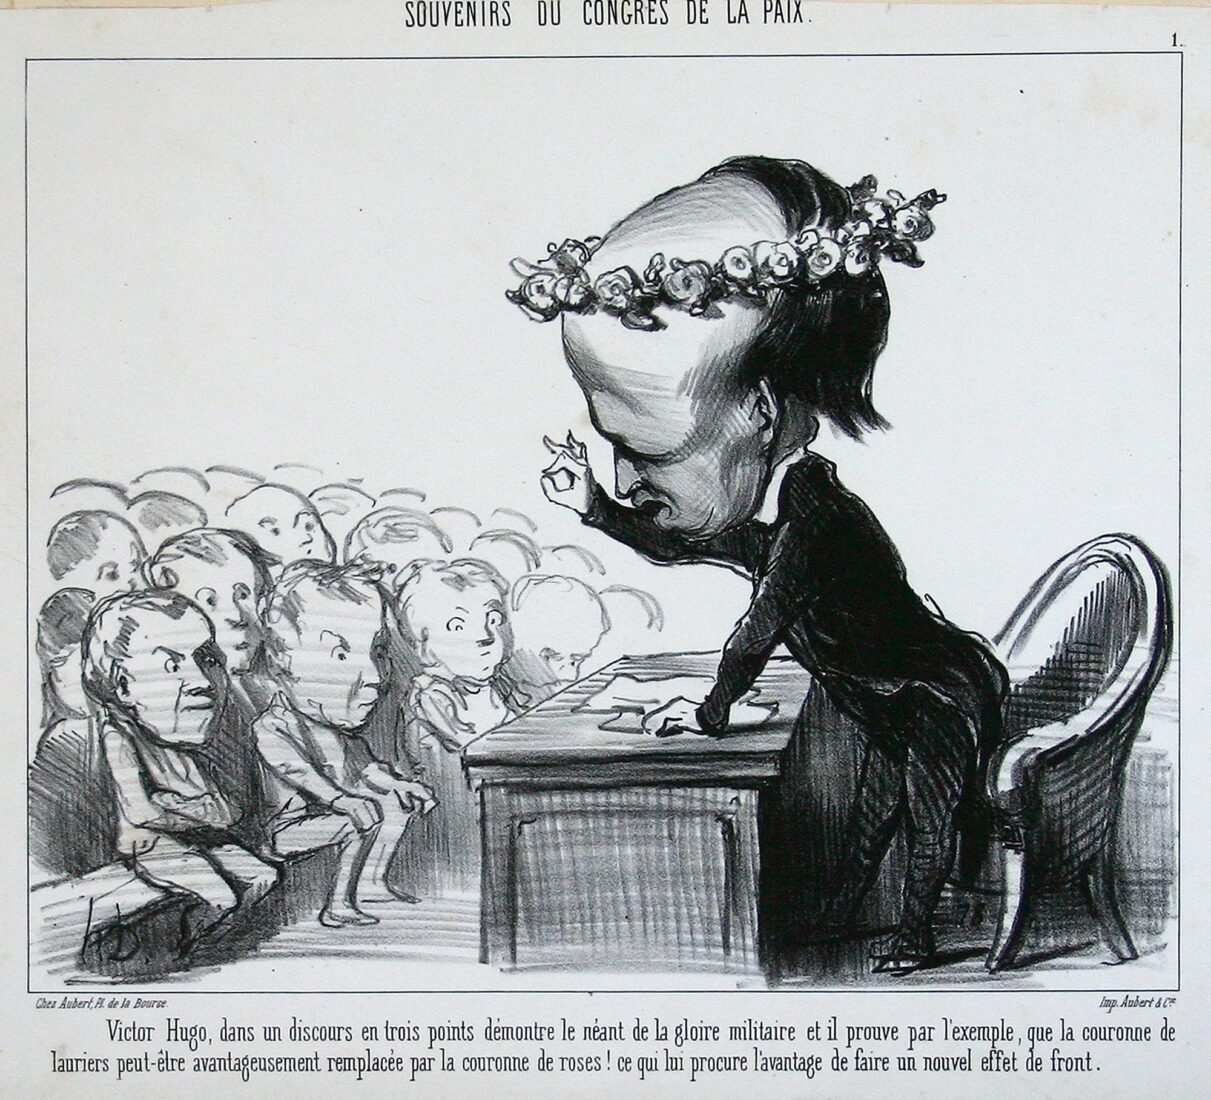 “Victor Hugo in a speech shows in three points the emptiness of military fame” - Daumier Honore